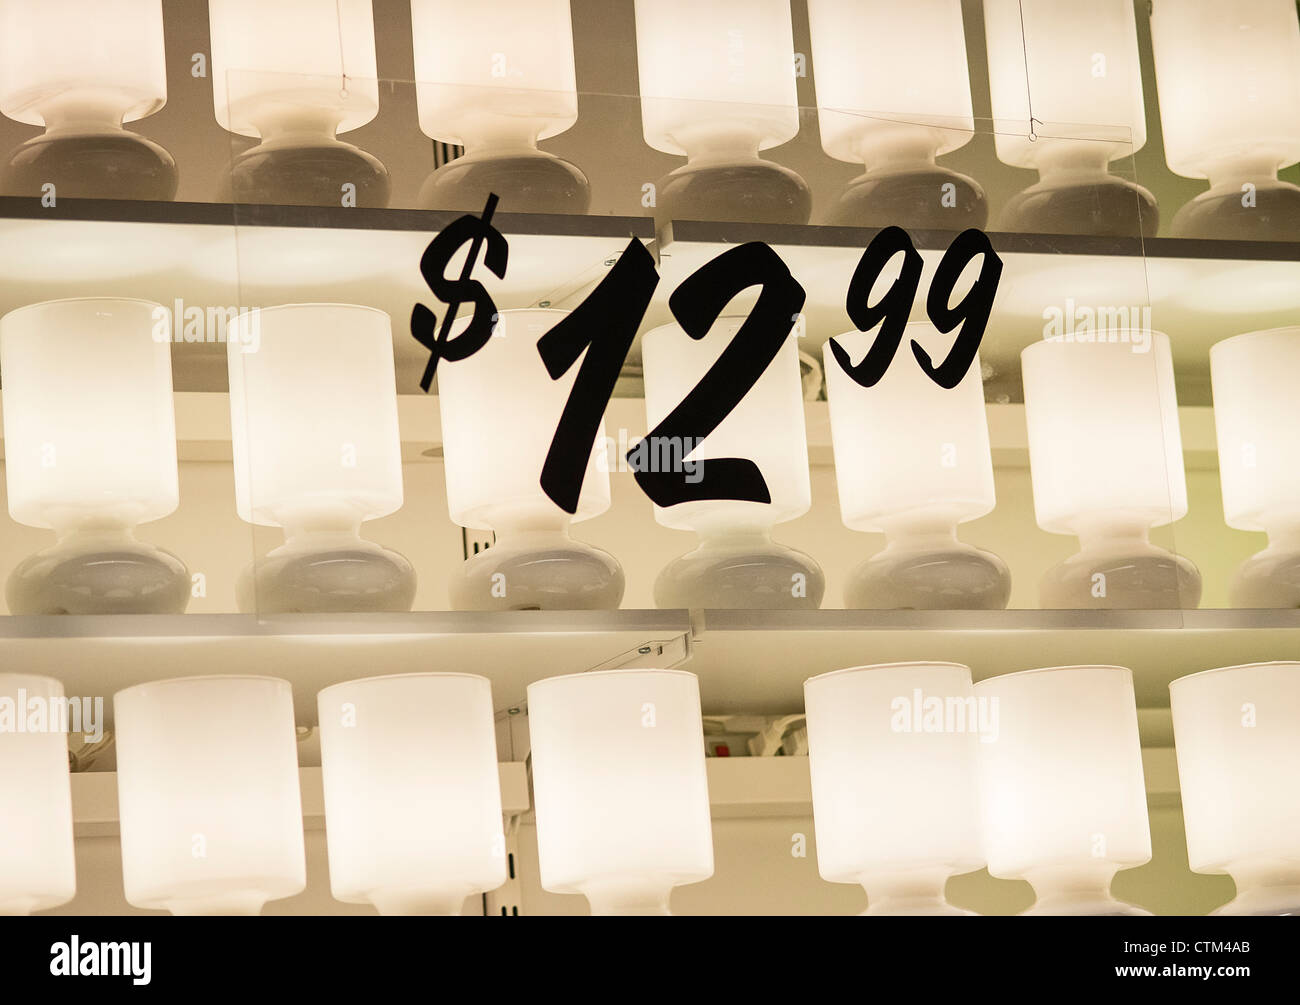 Lamps for sale in a retail store. Stock Photo